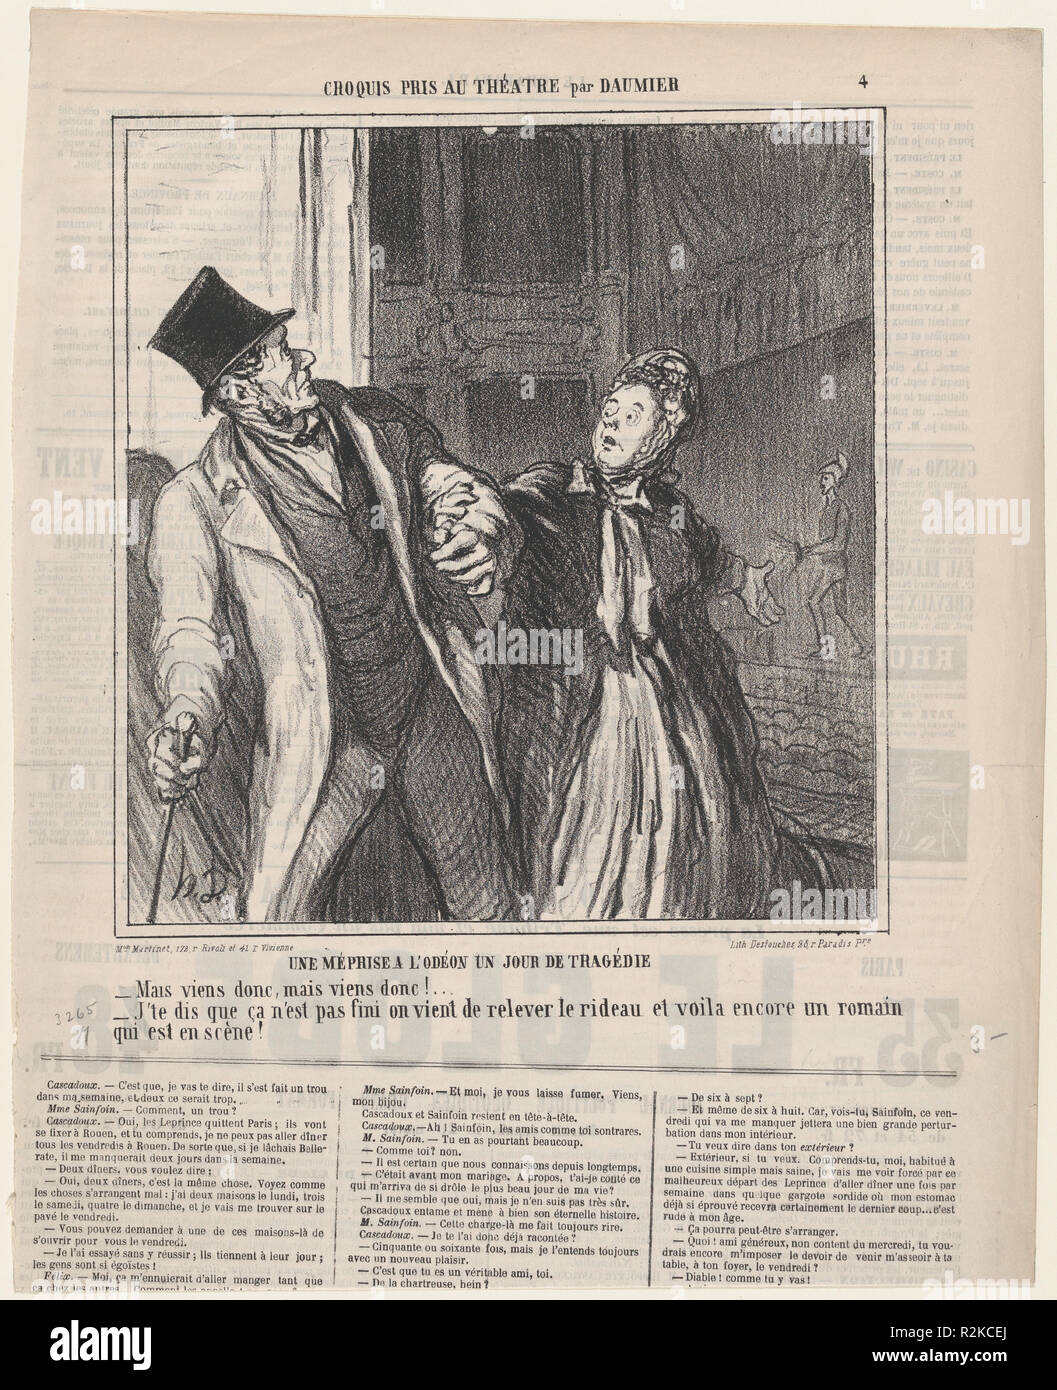 A misapprehension at the Odeon, on a day of drama, from 'Theater sketches,' published in Le Charivari, May 4, 1864. Artist: Honoré Daumier (French, Marseilles 1808-1879 Valmondois). Dimensions: Image: 8 7/8 × 8 5/16 in. (22.5 × 21.1 cm)  Sheet: 14 1/8 × 11 5/16 in. (35.8 × 28.8 cm). Printer: Destouches (Paris). Publisher: Aaron Martinet (French, 1762-1841). Series/Portfolio: 'Theater sketches' (Croquis pris au théatre). Date: May 4, 1864.  - Come on, come on let's go!   - I am telling you it's not finished. The curtain has gone up again and there is still Roman on the stage. Museum: Metropolit Stock Photo